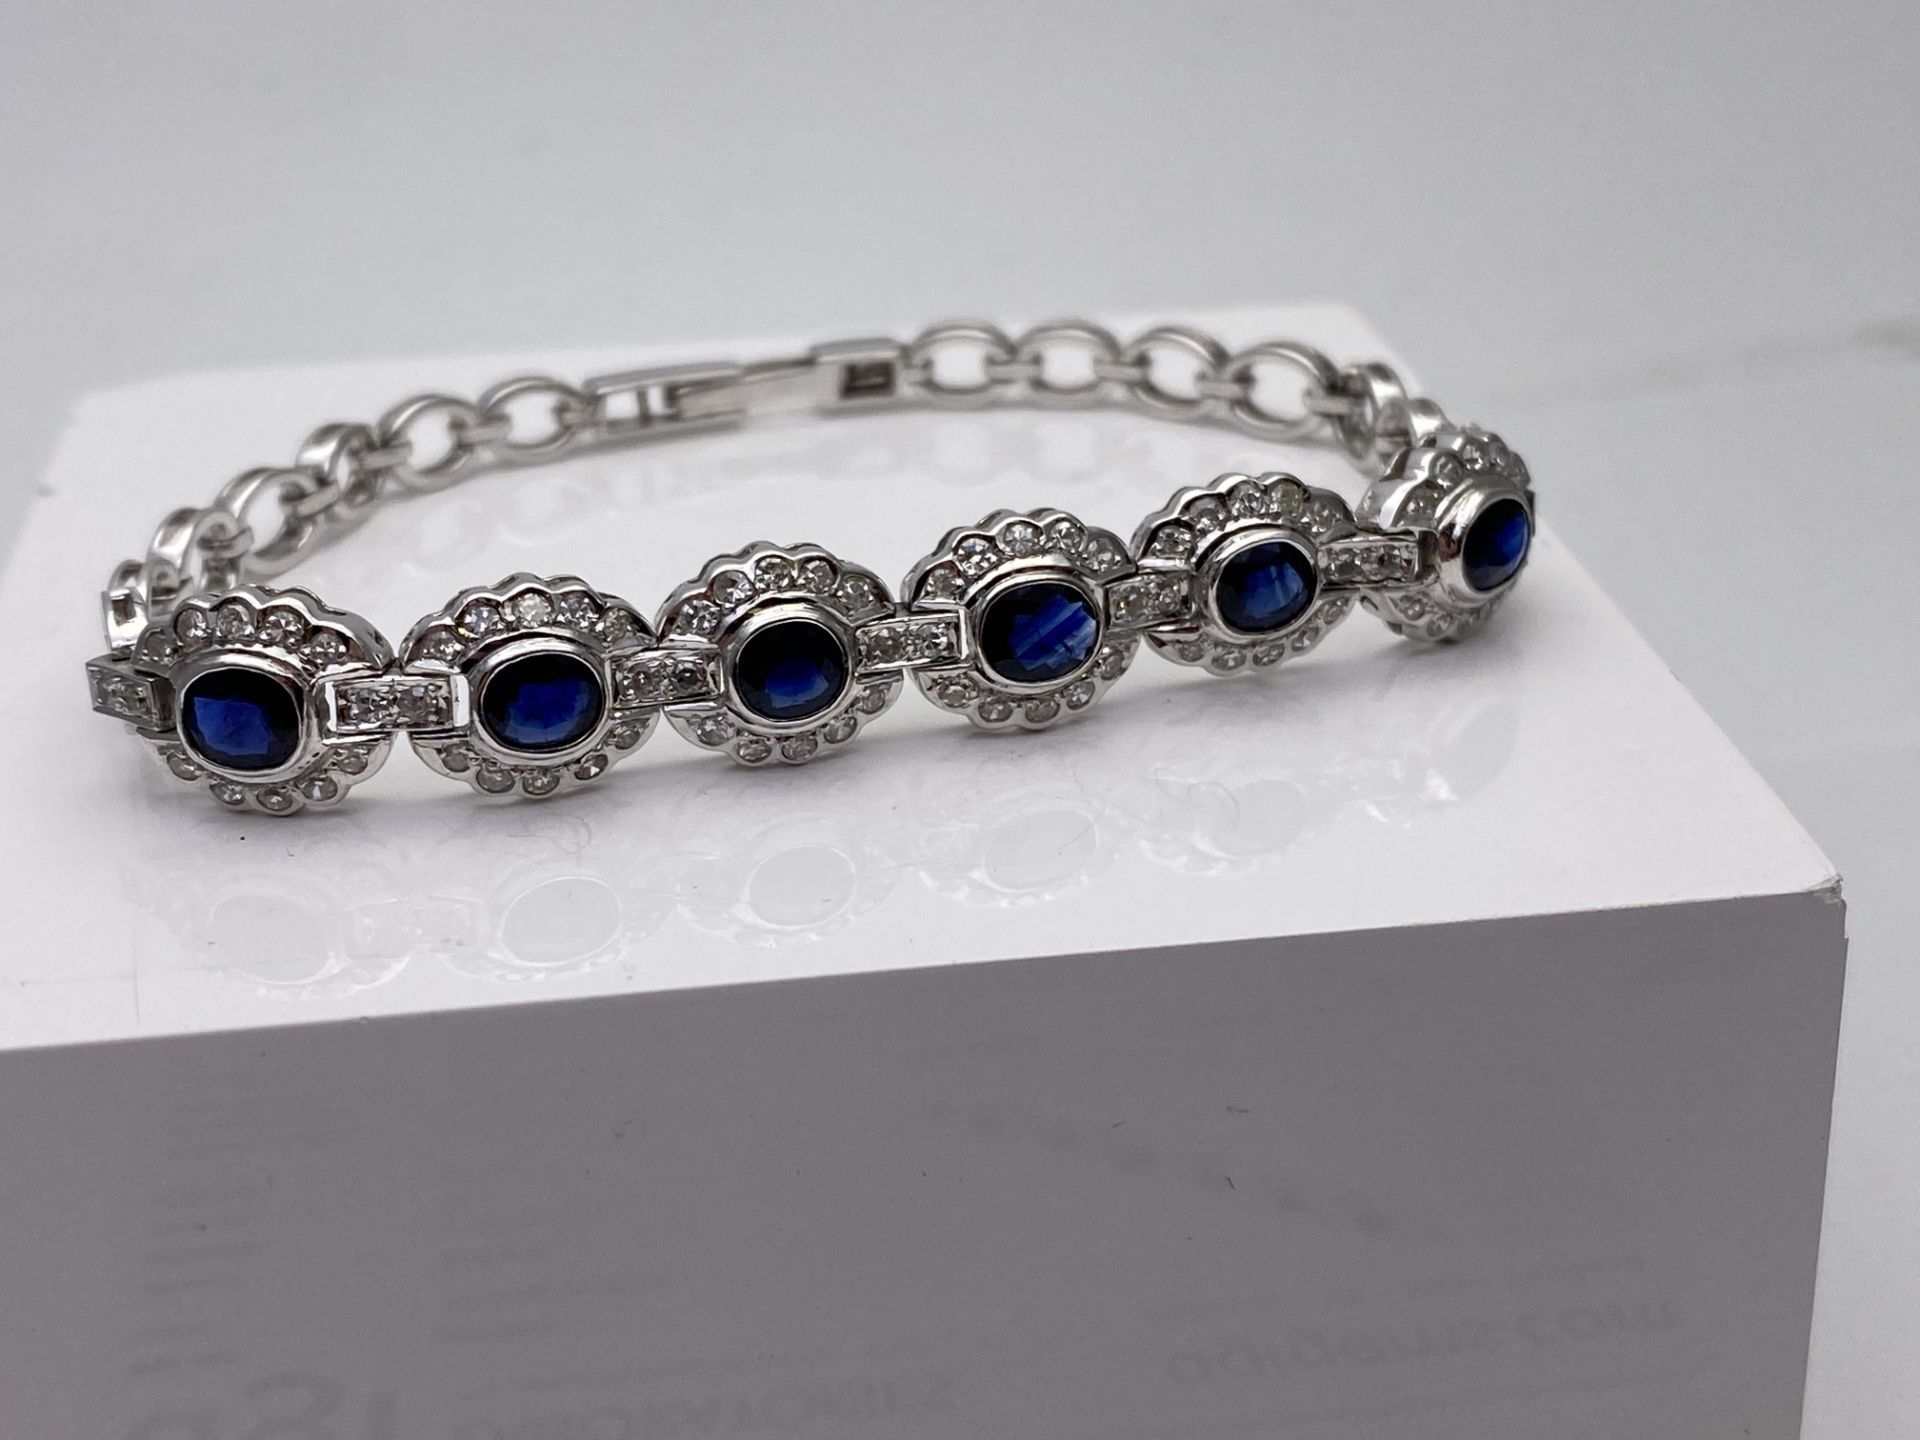 ***£5995.00*** 18CT WHITE GOLD LADIES DIAMOND AND SAPPHIRE VINTAGE STYLE BRACELET, SET WITH 1. - Image 4 of 4